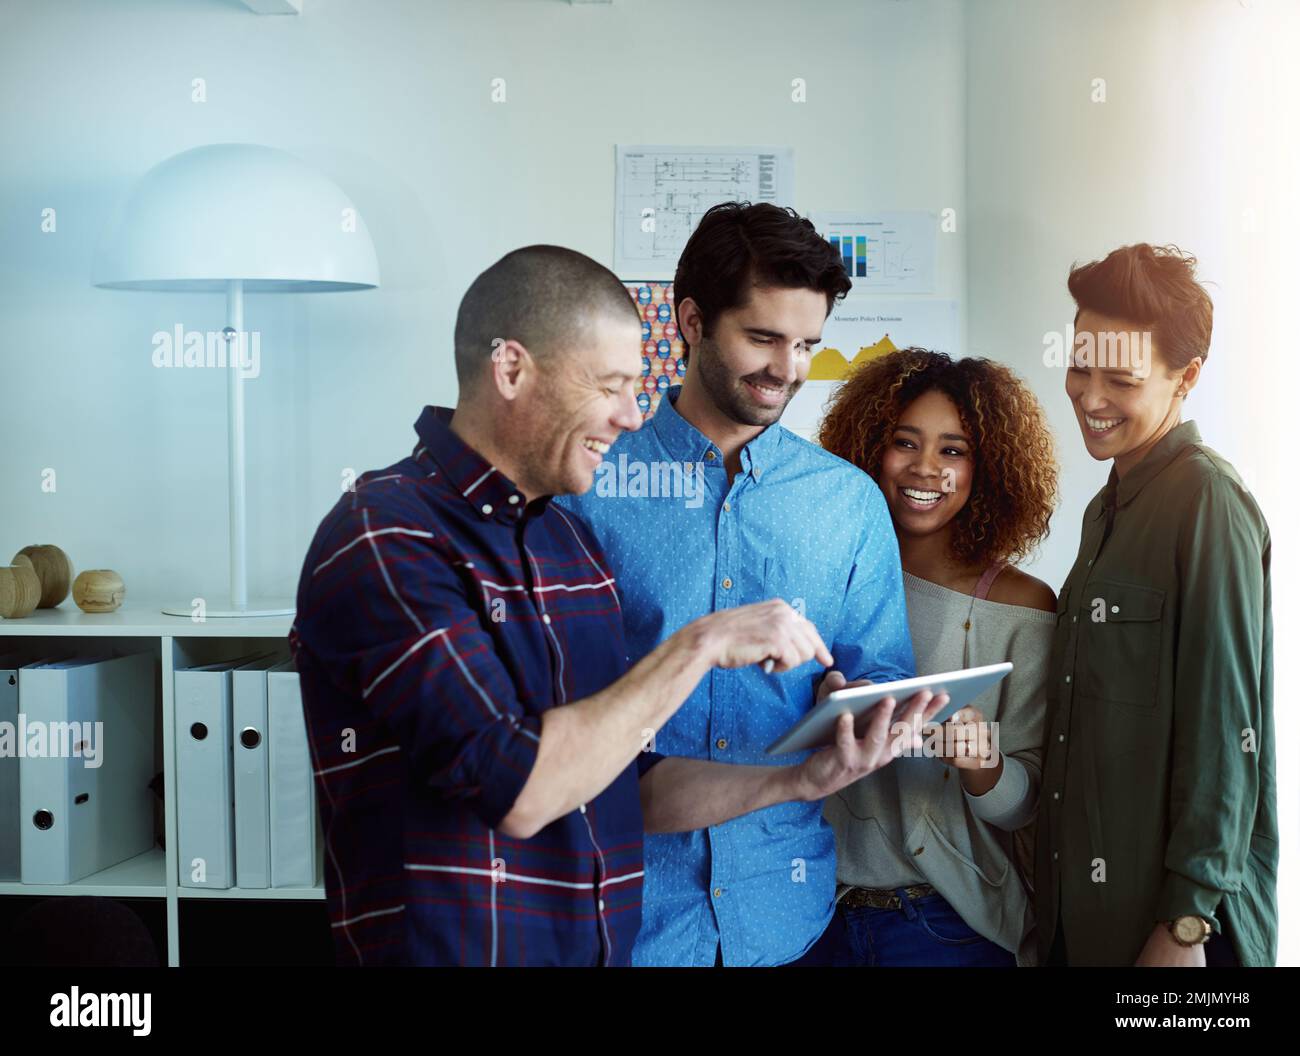 Teamwork has given us a one-stop solution. a group of coworkers discussing something on a tablet. Stock Photo